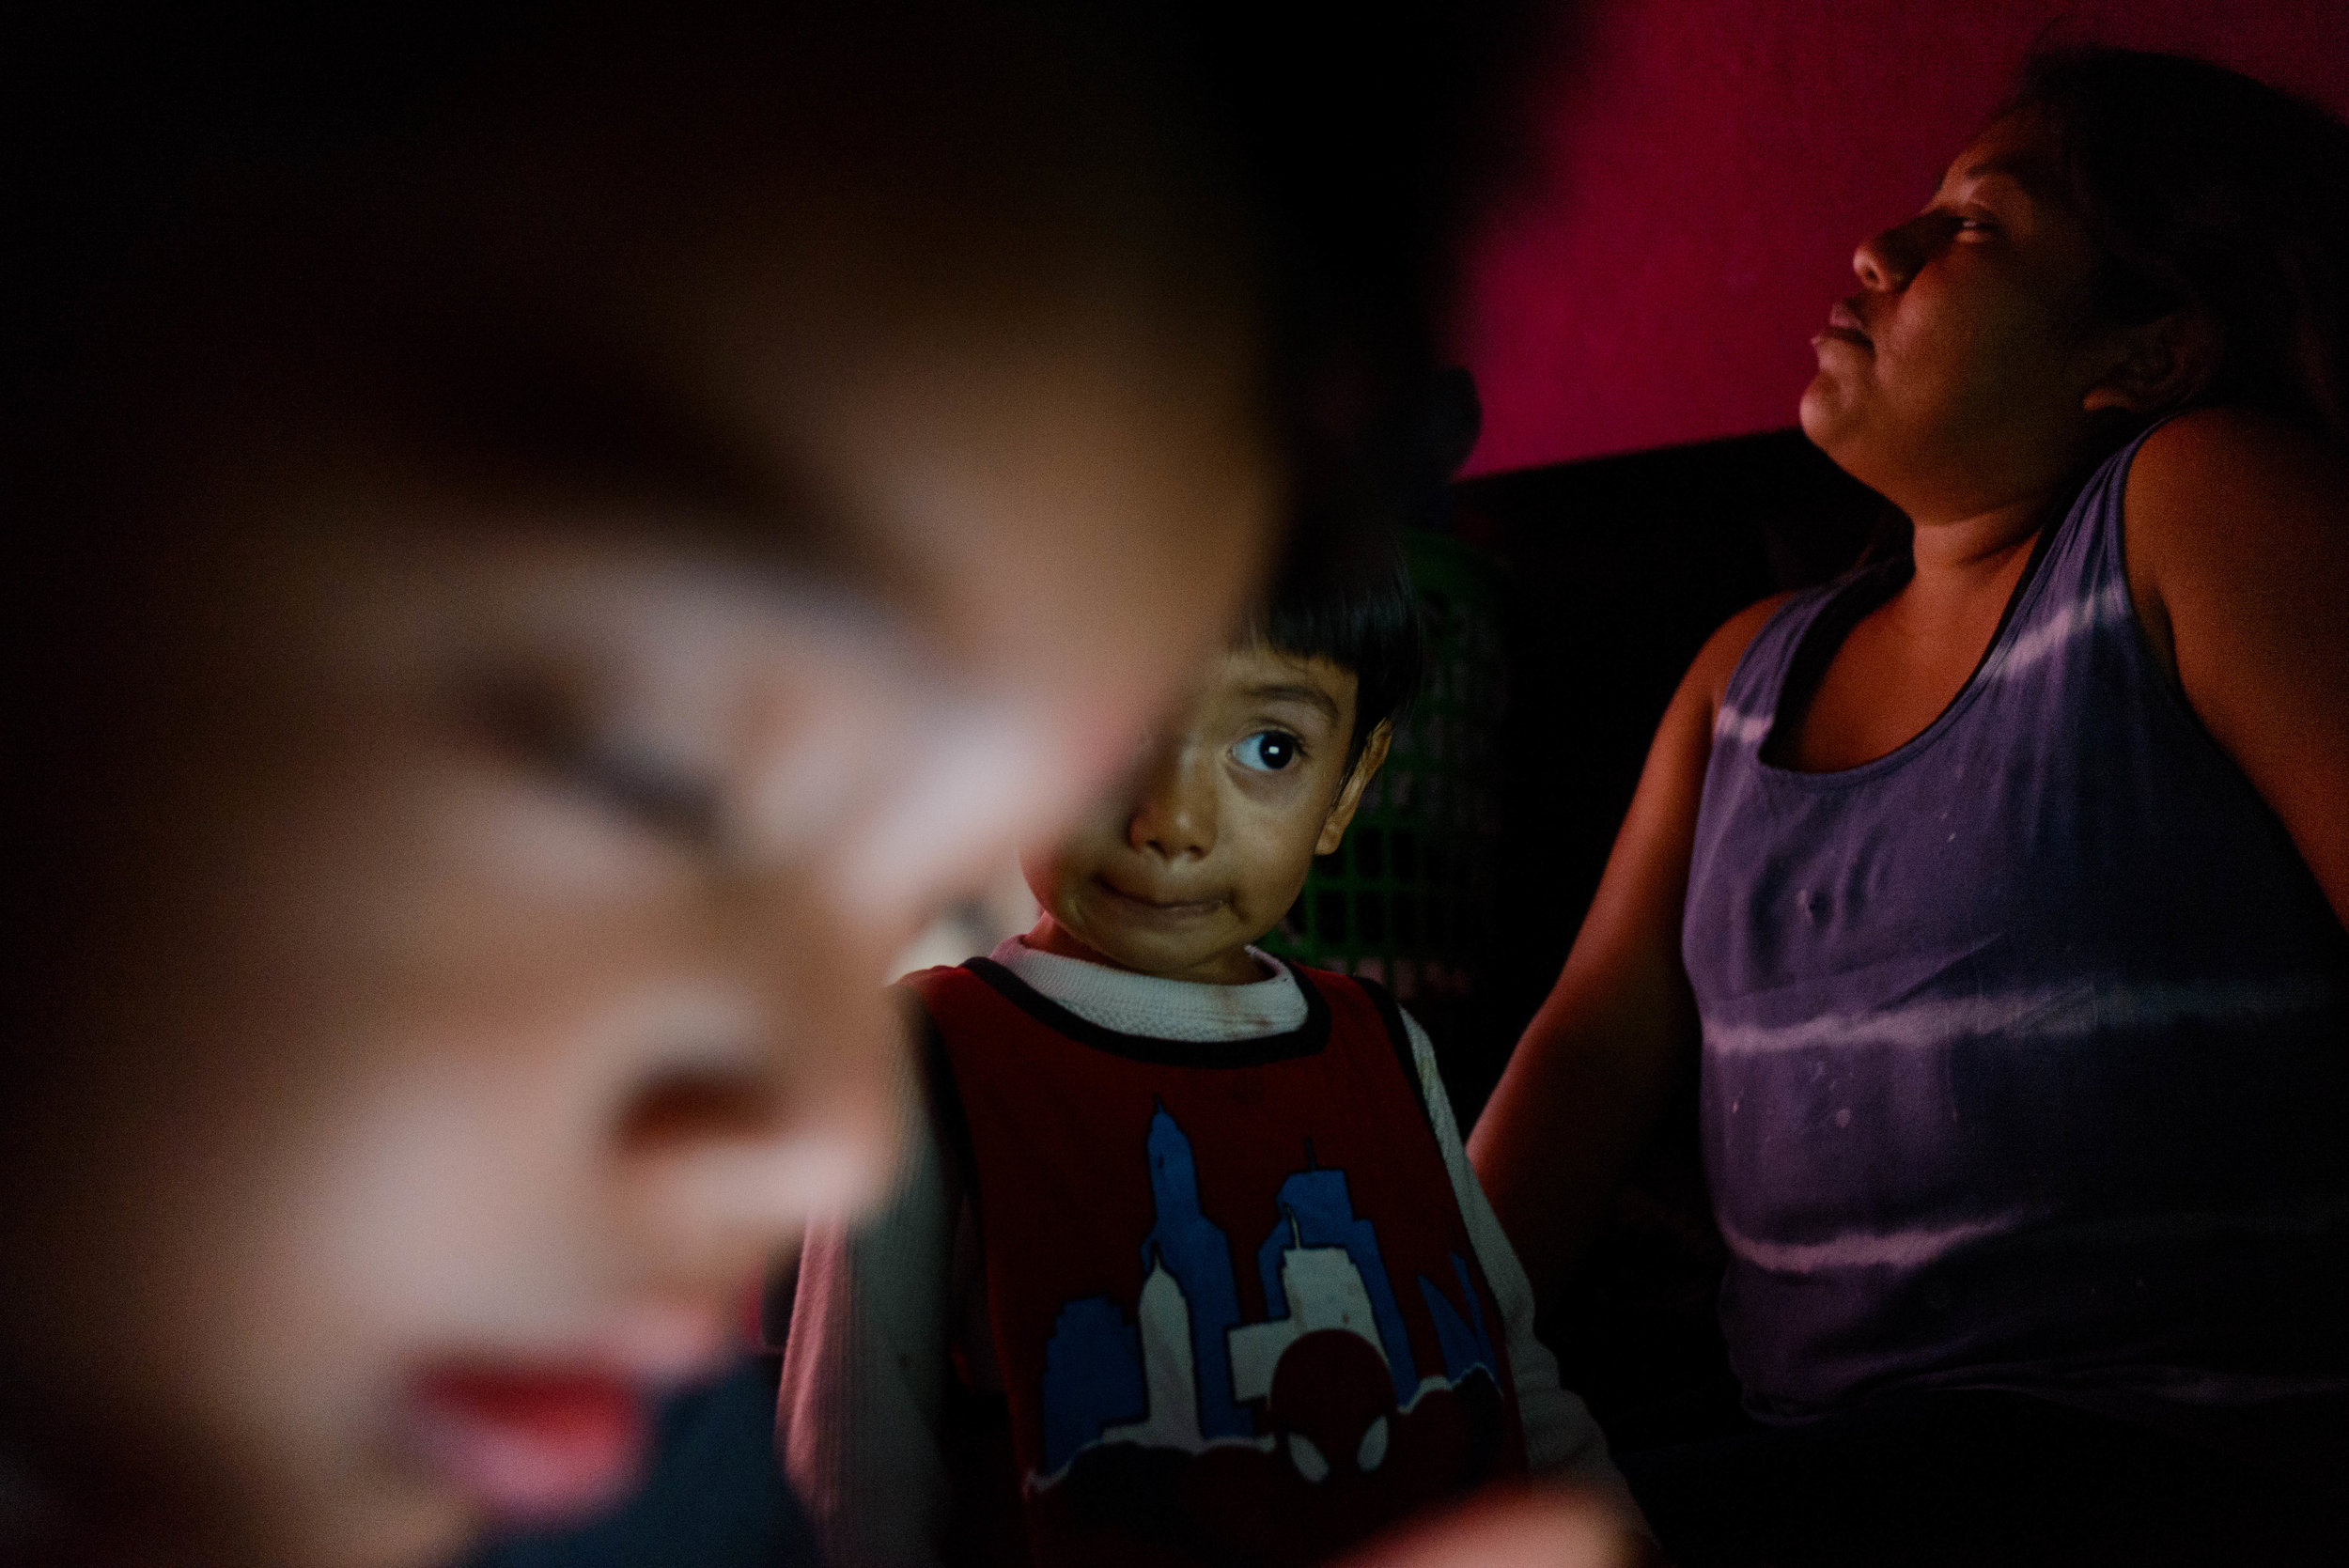  Josefina relaxes while her son and nephew entertain themselves with music videos on a laptop. 